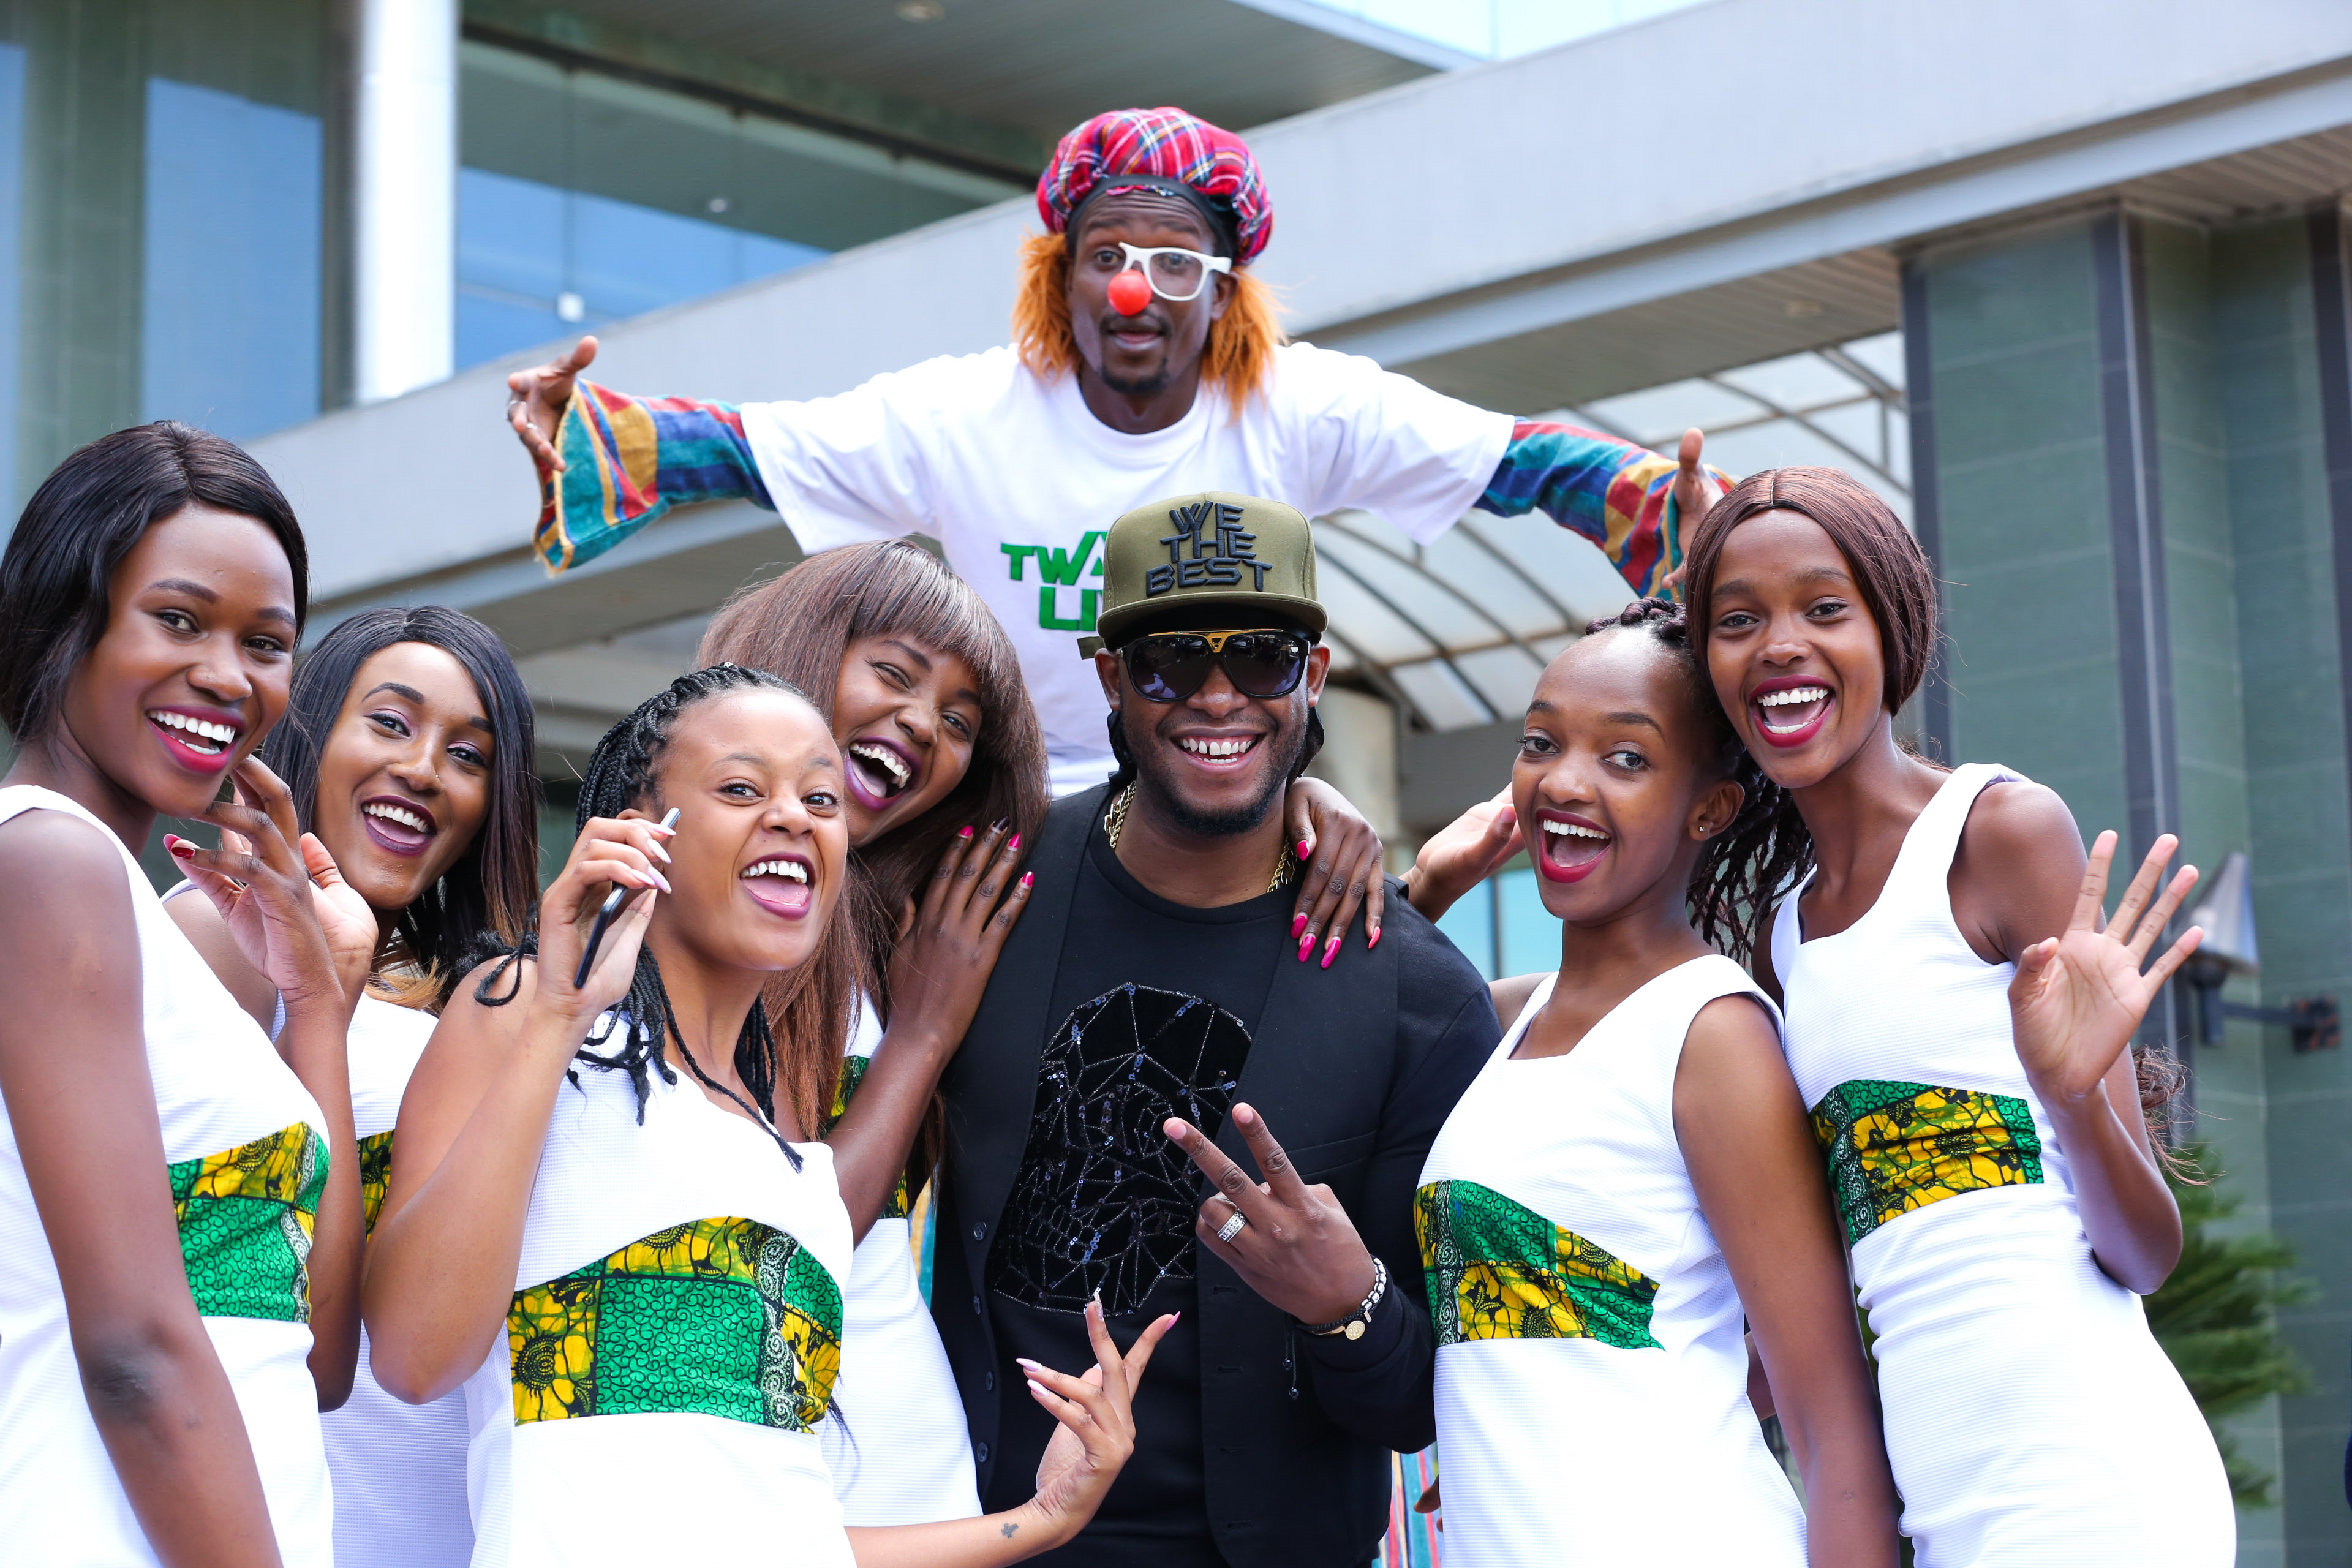 Redsan poses with models during the Safaricom Twaweza Flag off at Safaricom Headquarters. They will form art of the crew that will perform in the live concert scheduled to be held in Eldoret. - Bizna